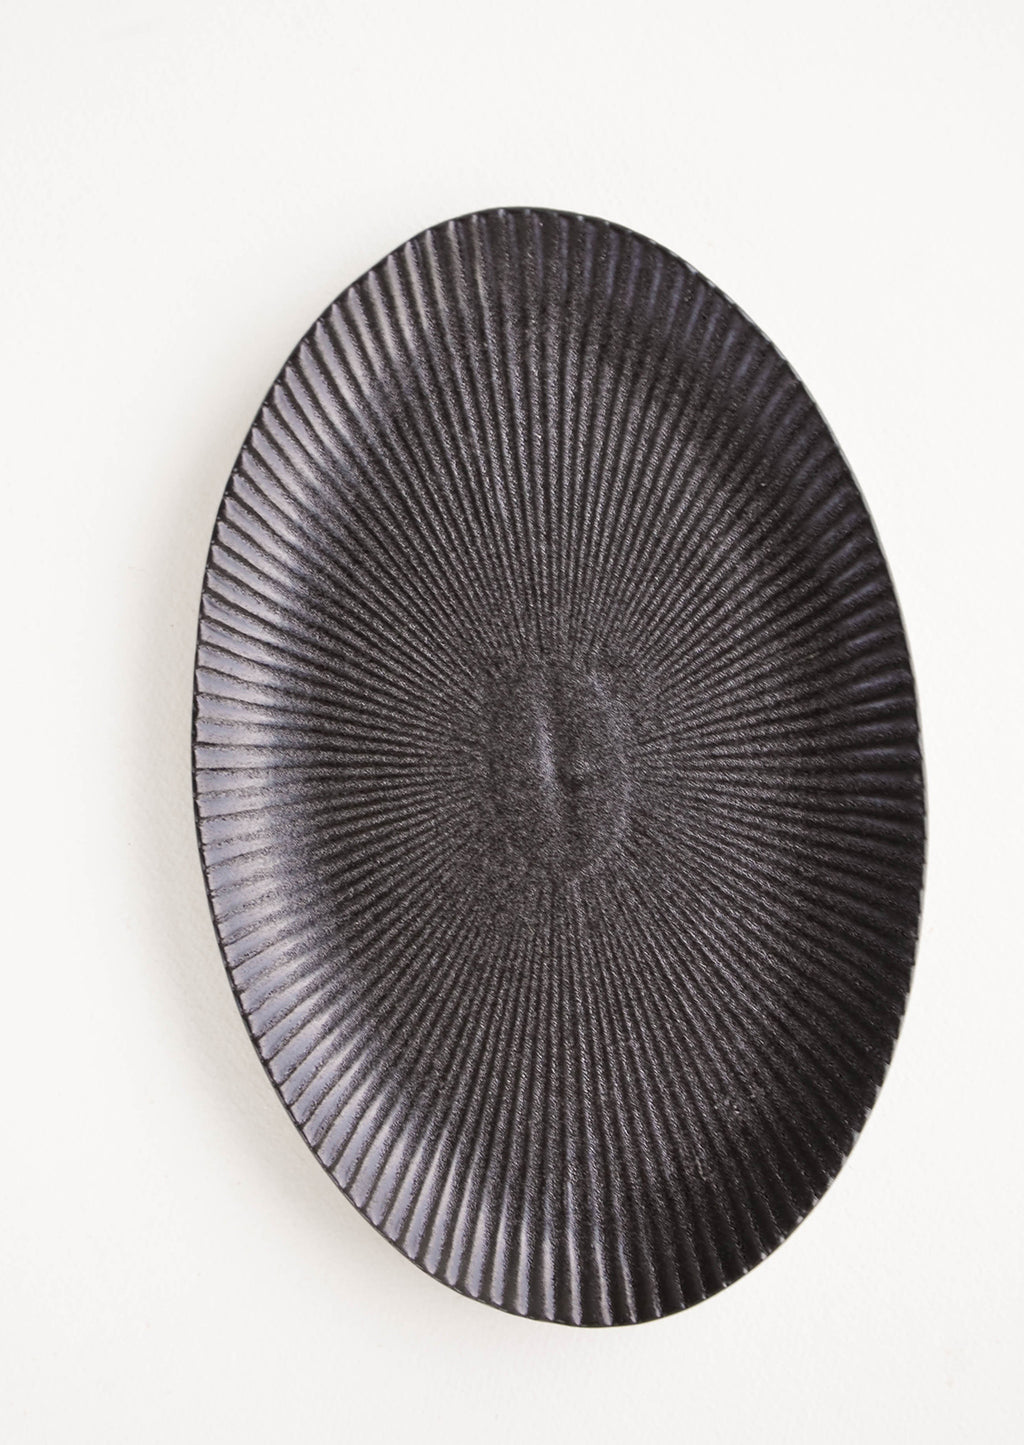 3: Oval-shaped, black ceramic tray with radiating lines pattern